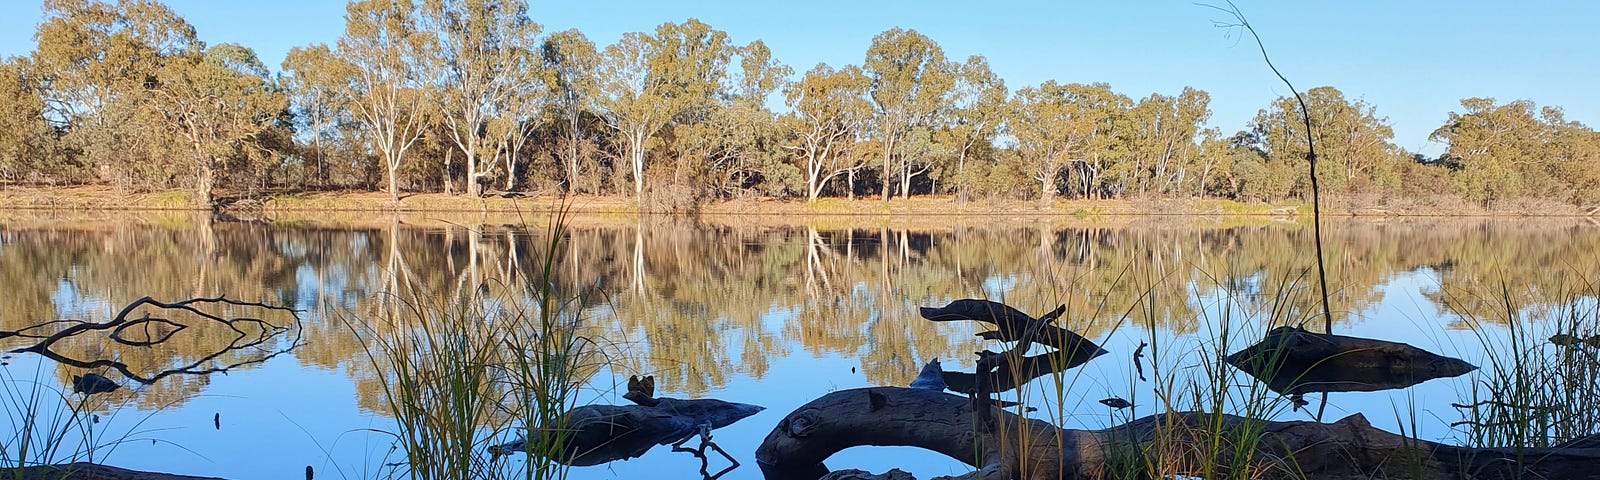 A serene river landscape with gum trees in the background and logs in foreground